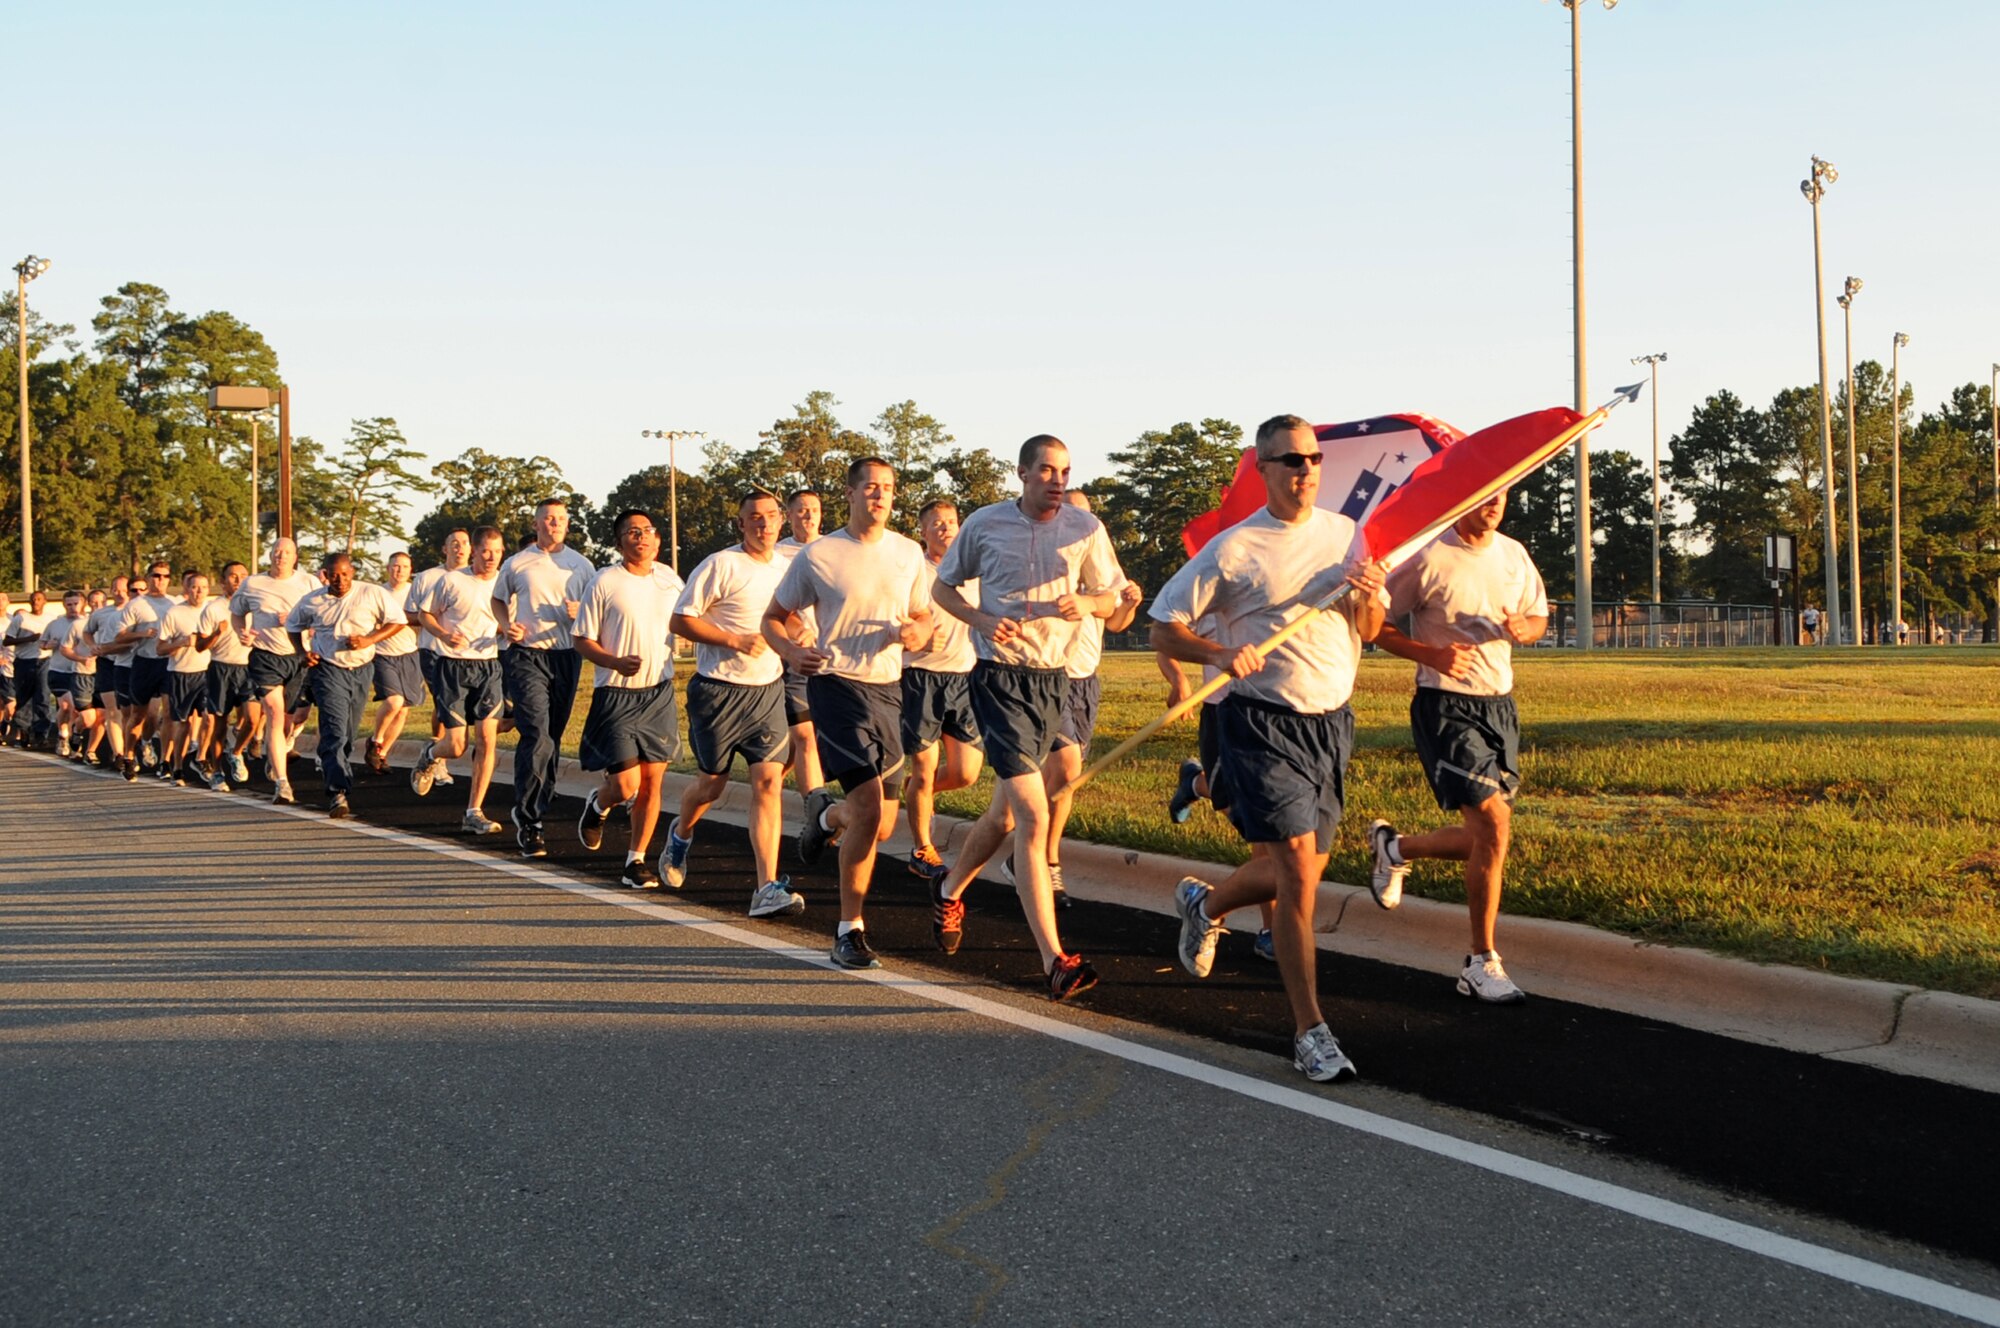 U.S. Air Force Lt. Col. Richard Dwyer, 4th Civil Engineer Squadron commander, carries the 9/11 Remembrance Flag as he leads members of his unit during a remembrance run on Seymour Johnson Air Force Base, N.C., Sept. 12, 2012. The 24-hour run, hosted by 4th CES firefighters, was one of many events held on base to commemorate the anniversary of 9/11. (U.S. Air Force photo/Airman 1st Class Aubrey Robinson/Released)